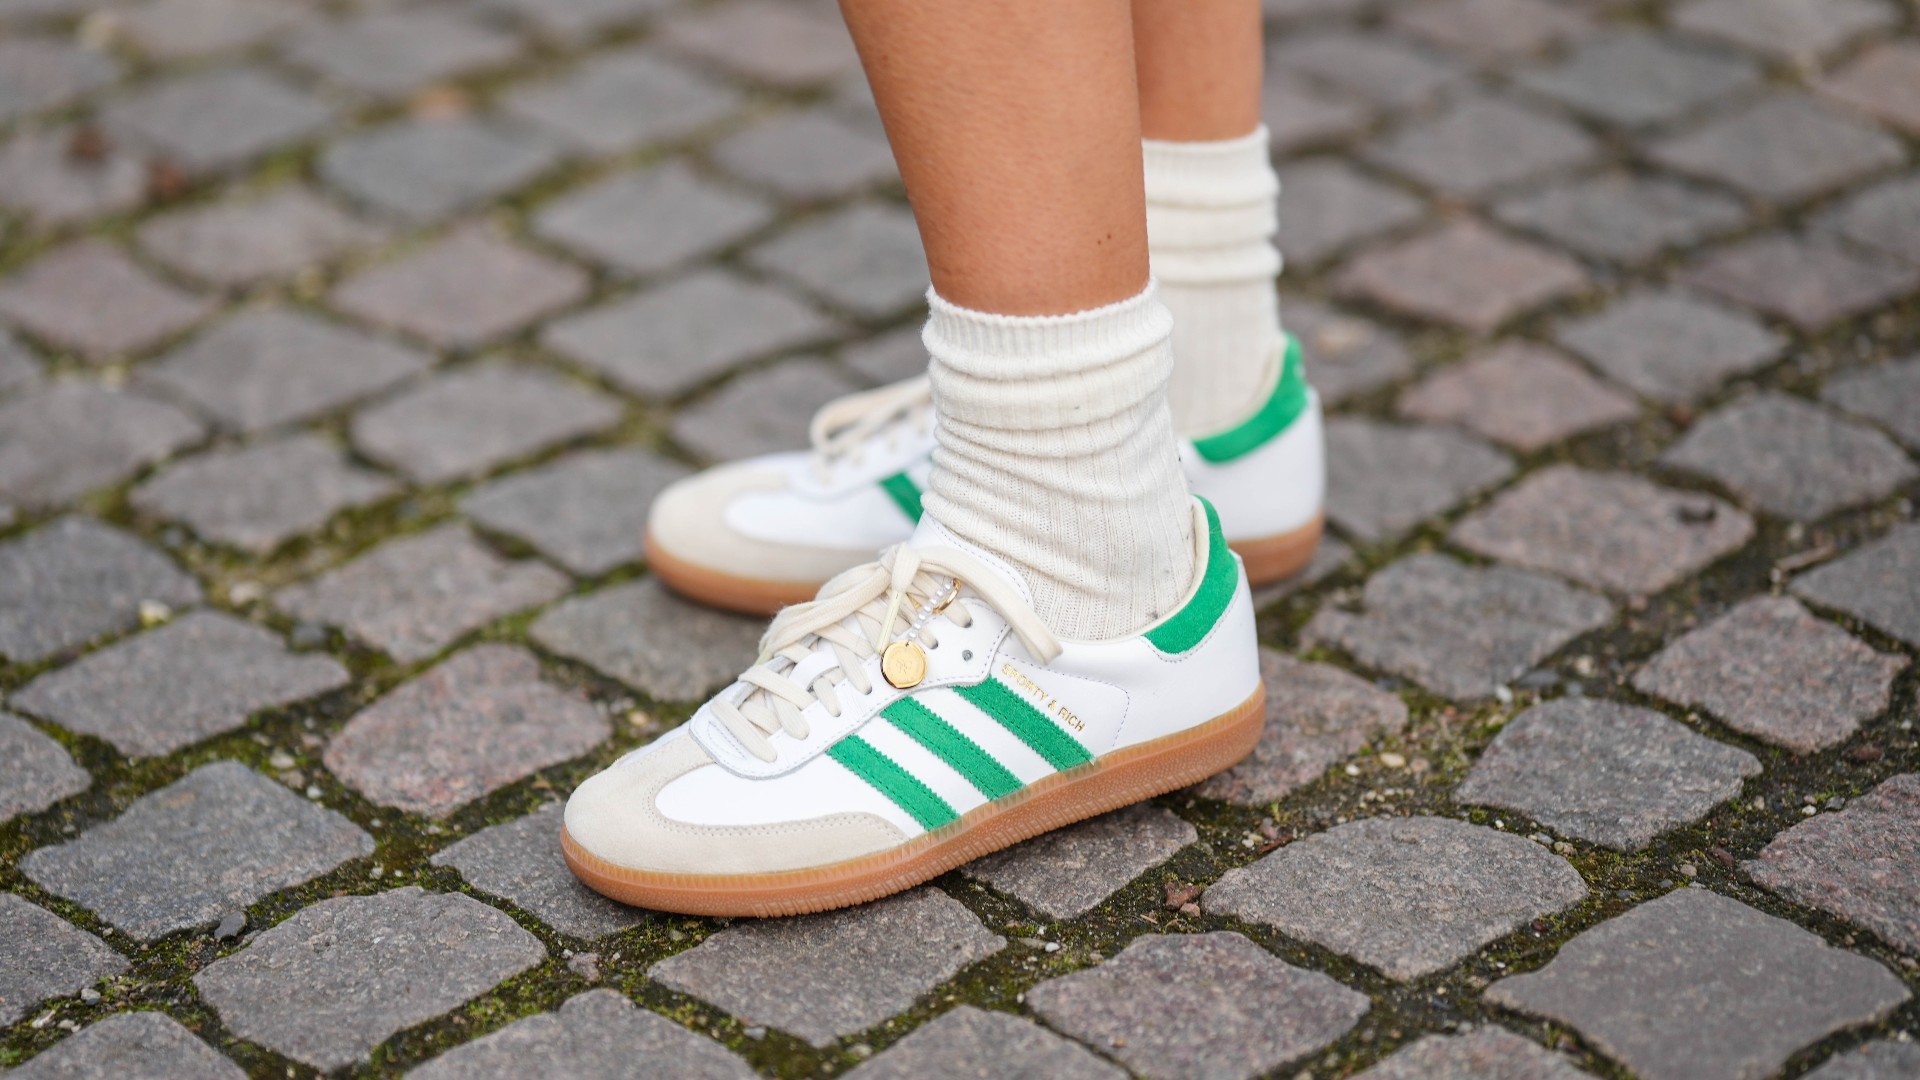 These Celeb-Loved Retro Sneakers Are Literally Everywhere